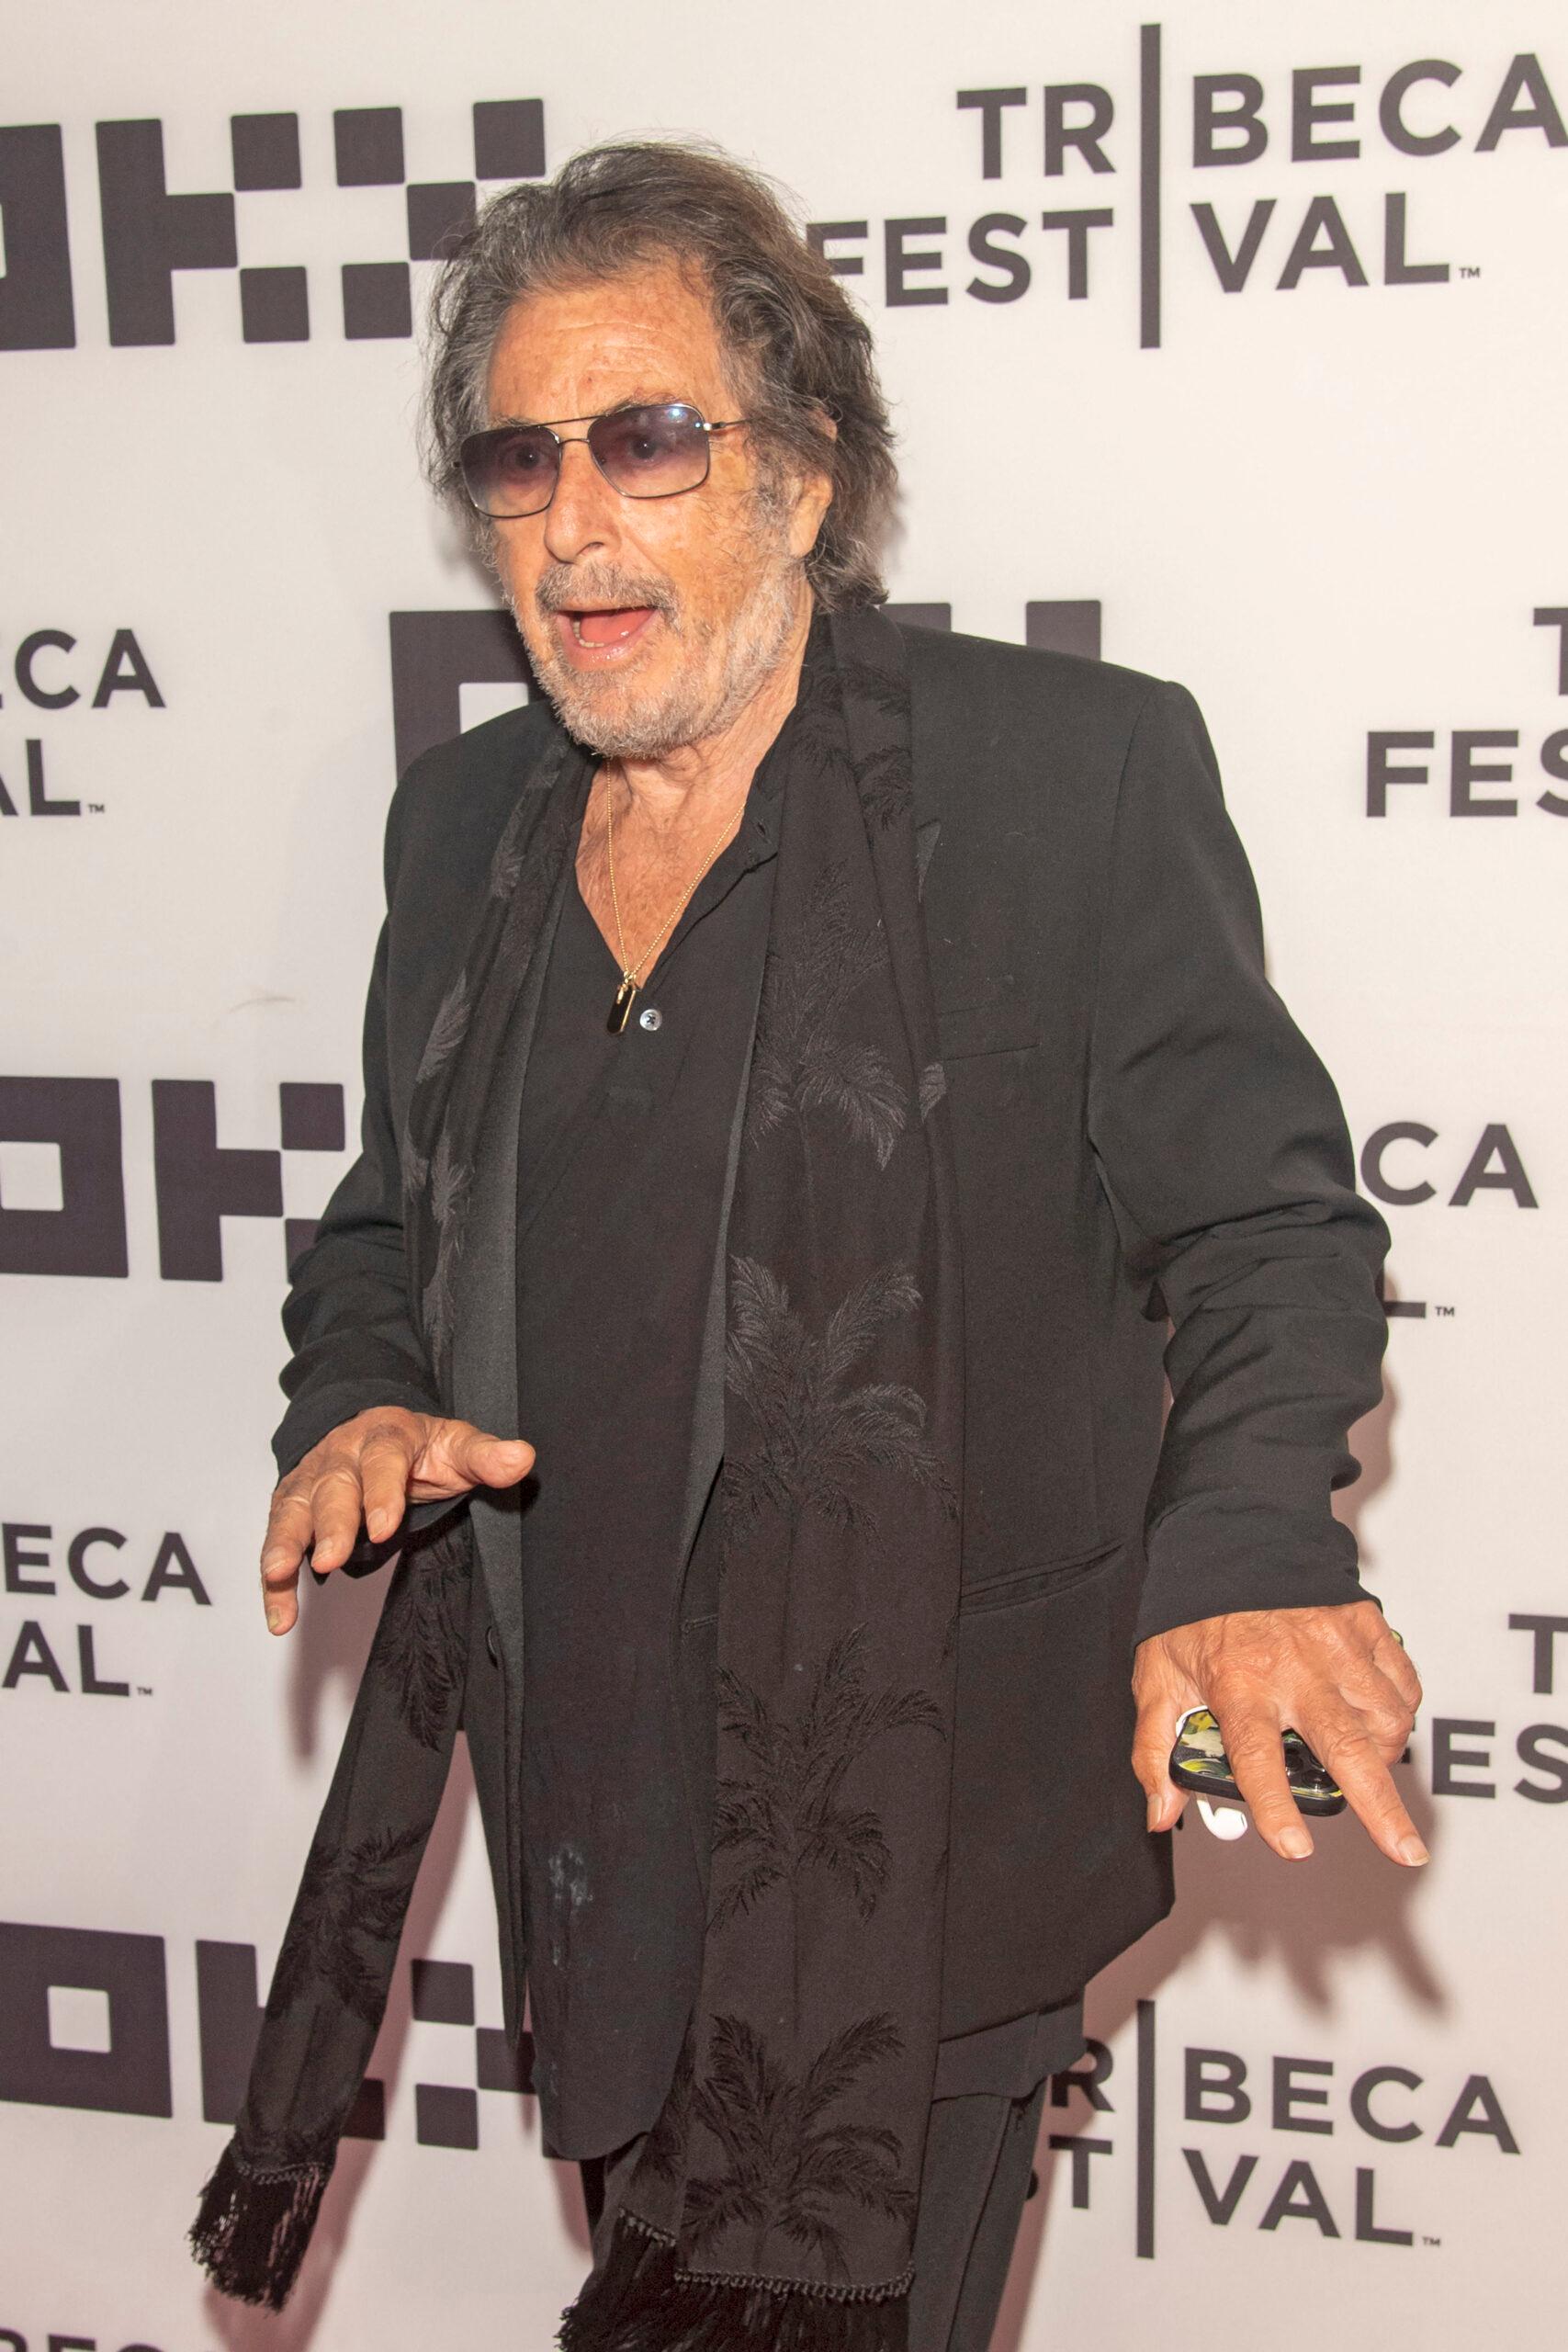 Al Pacino at the 2022 Tribeca Festival at United Palace Theater in NYC, USA - 17 Jun 2022